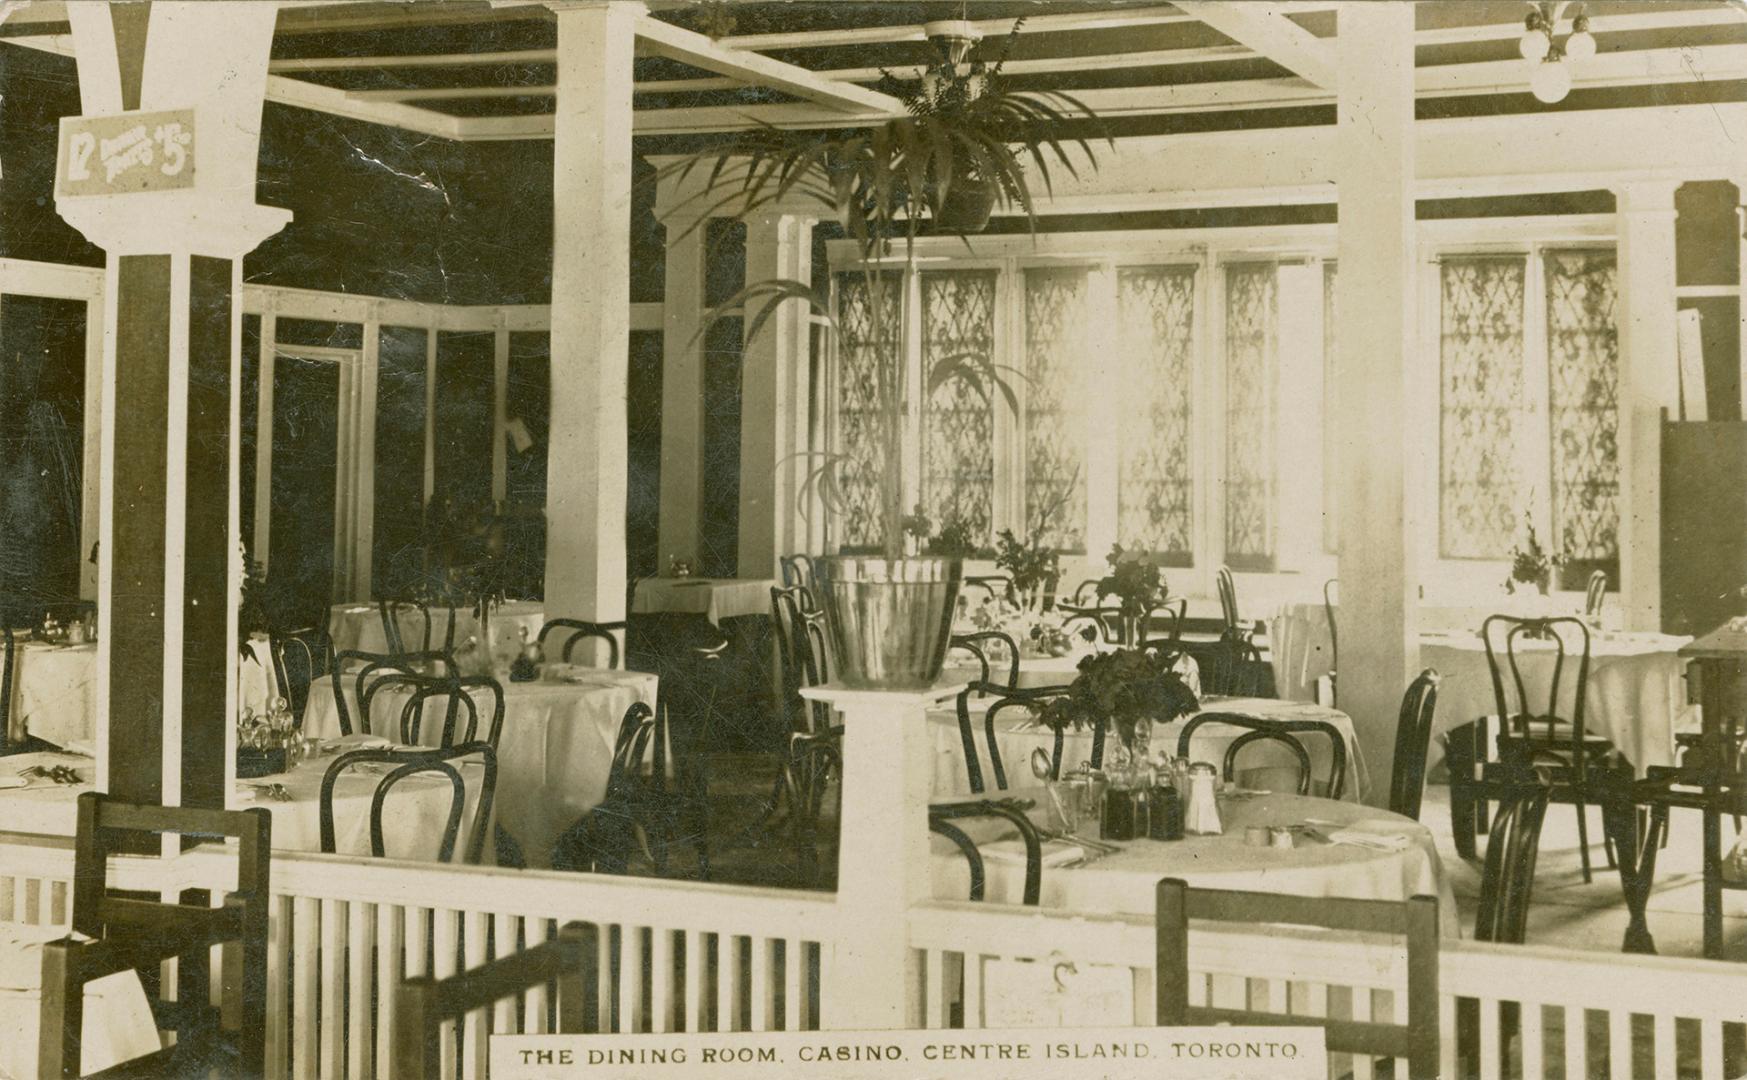 Shows the interior of a dining room.